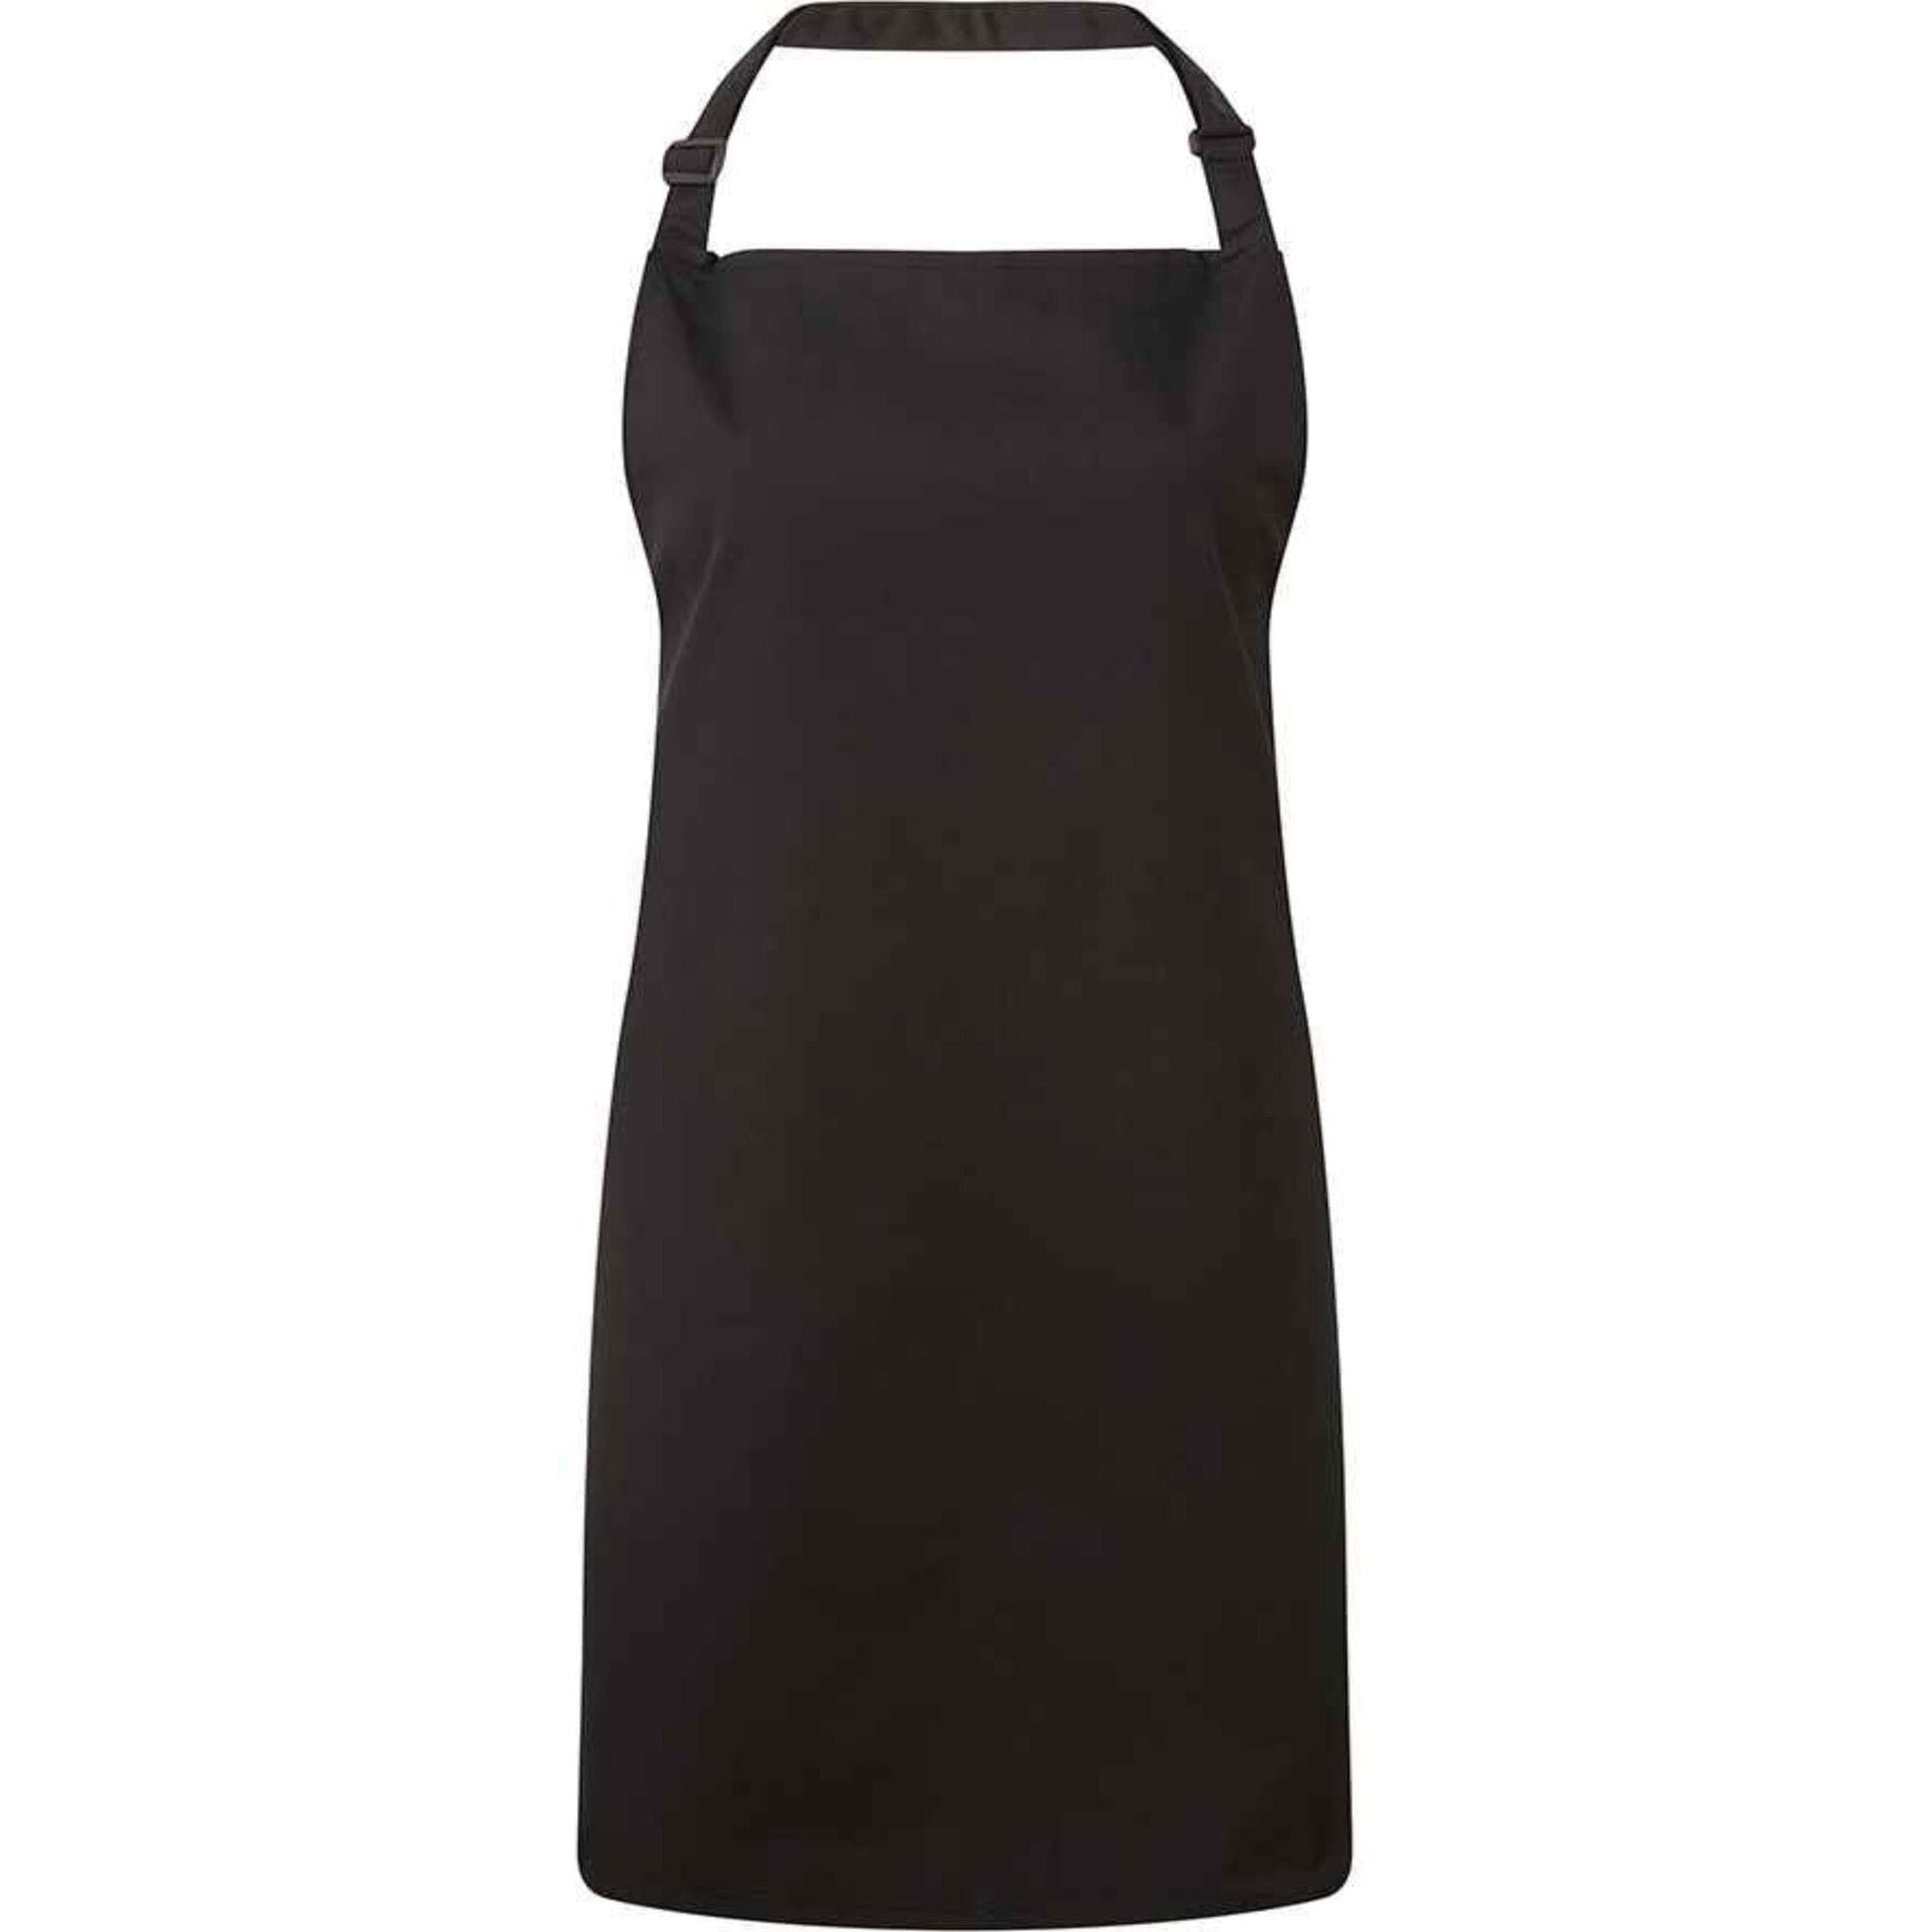 Personalised Apron with your Logo